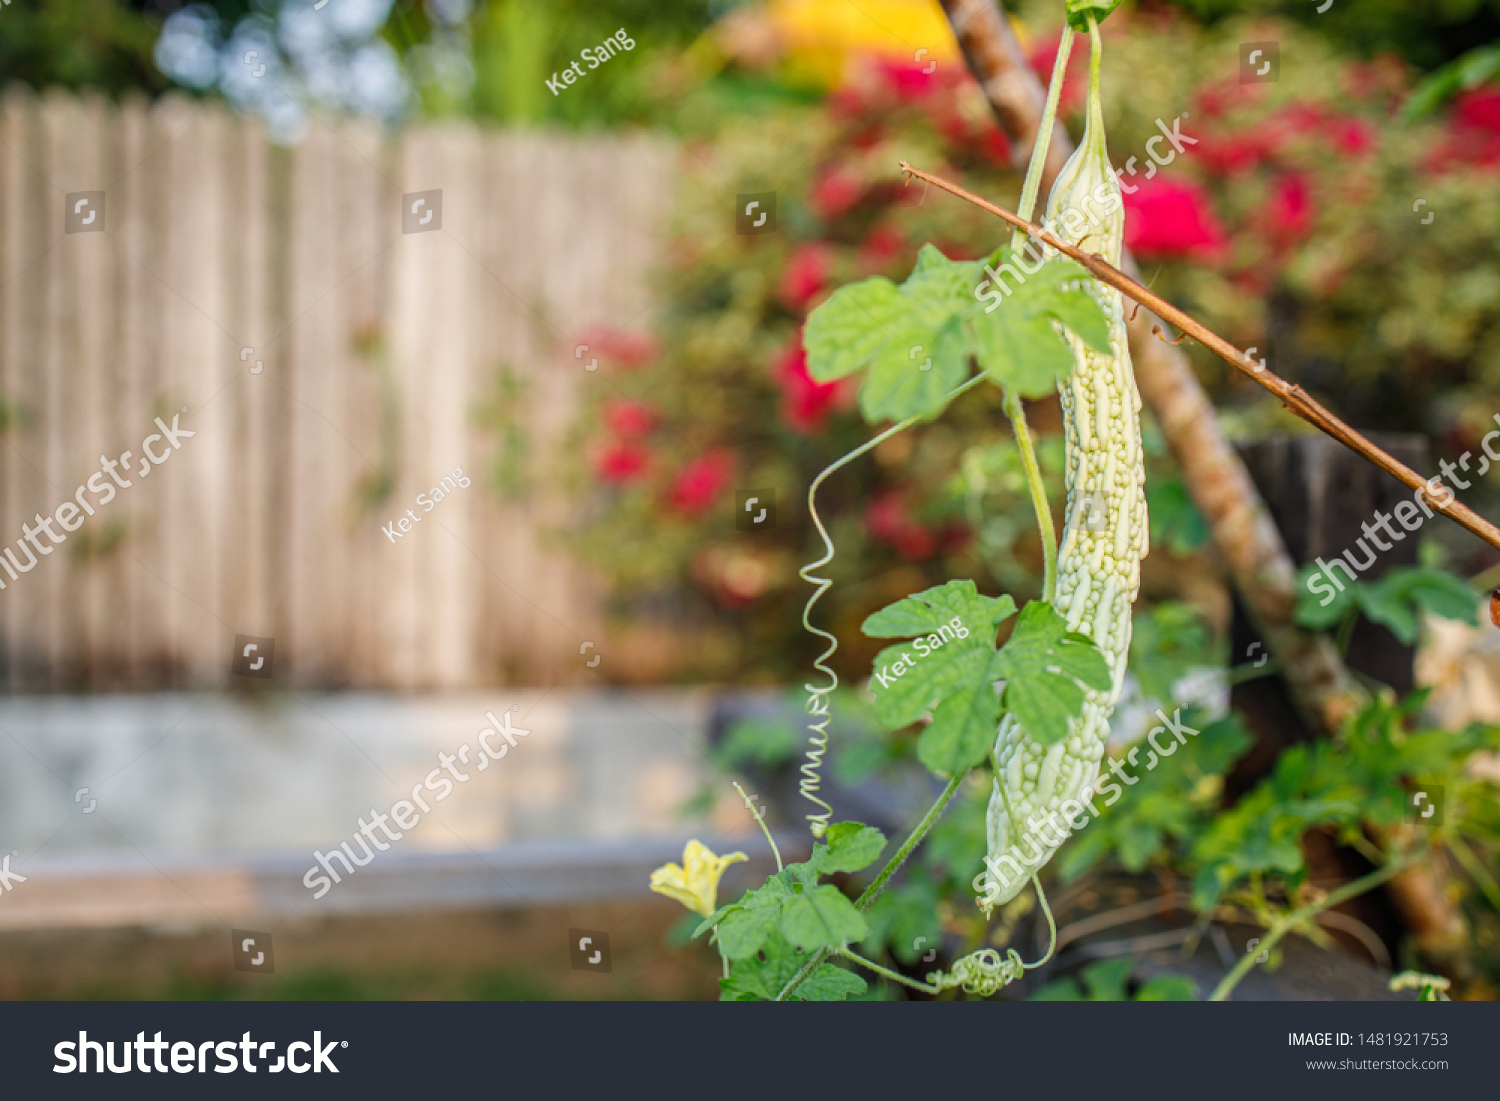 Small Bitter Gourd Melon Hanging Plant Royalty Free Stock Image